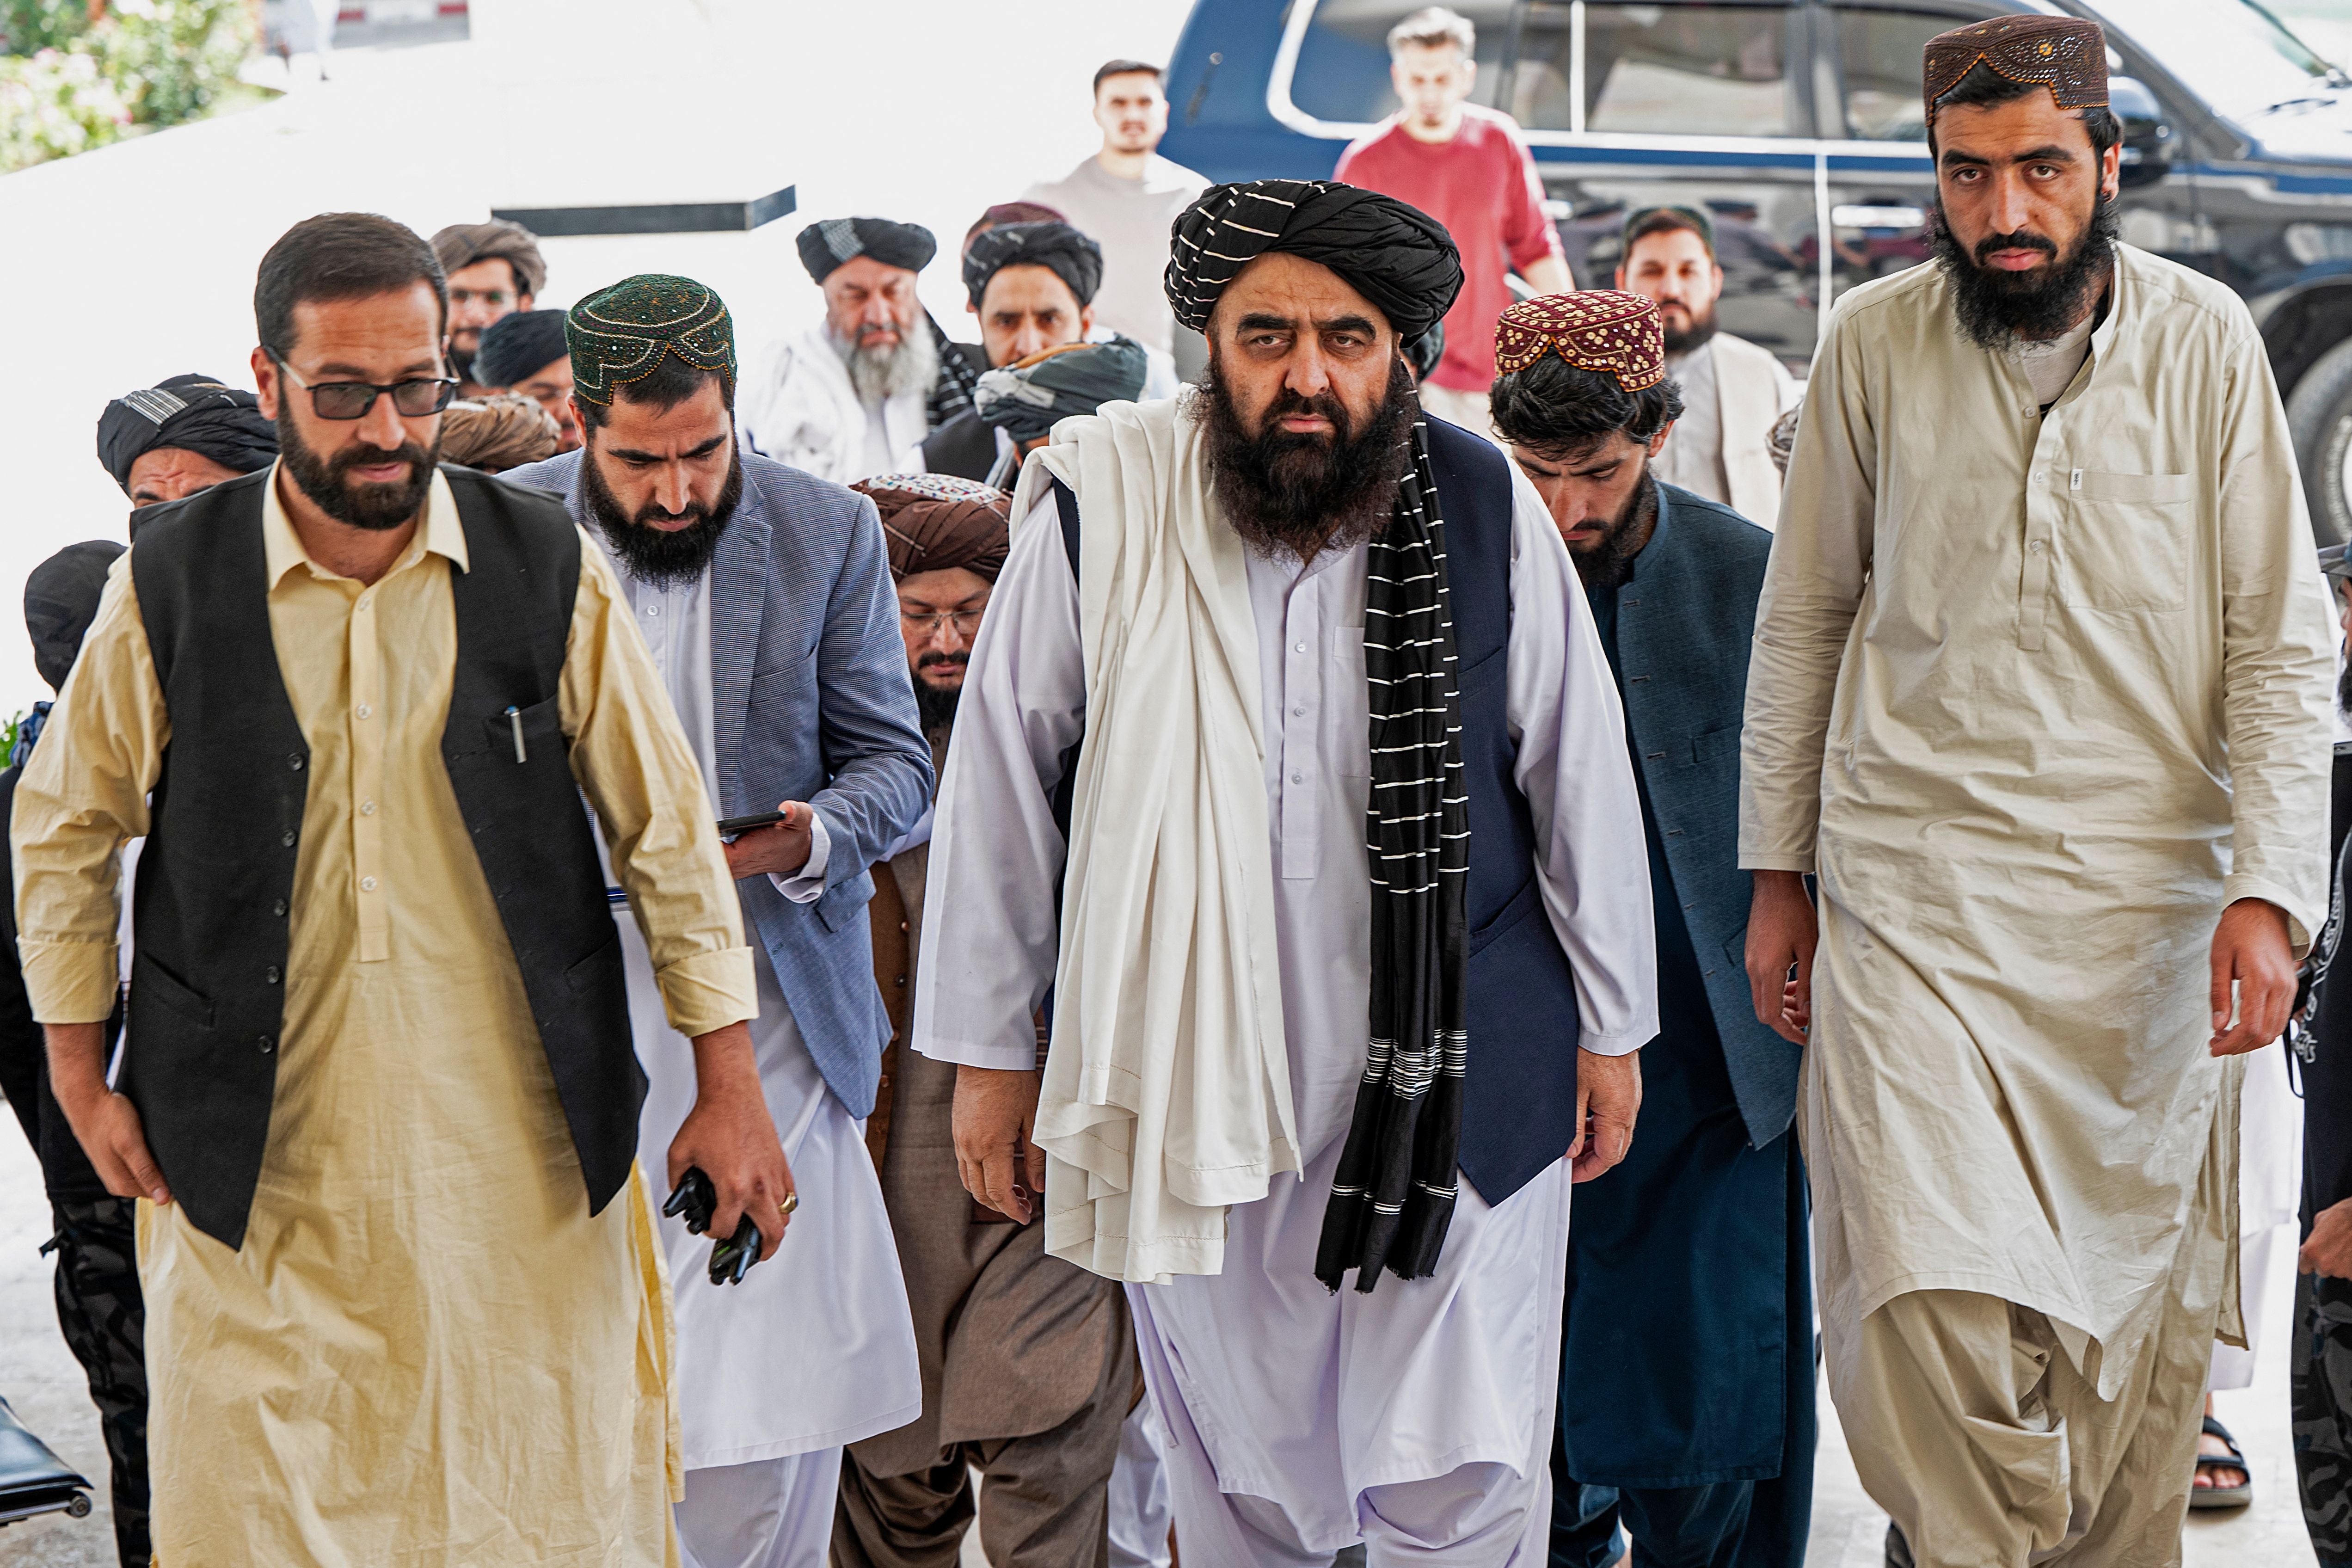 Taliban’s minister of foreign affairs, Amir Khan Muttaqi (centre) arrives at a press conference in Kabul